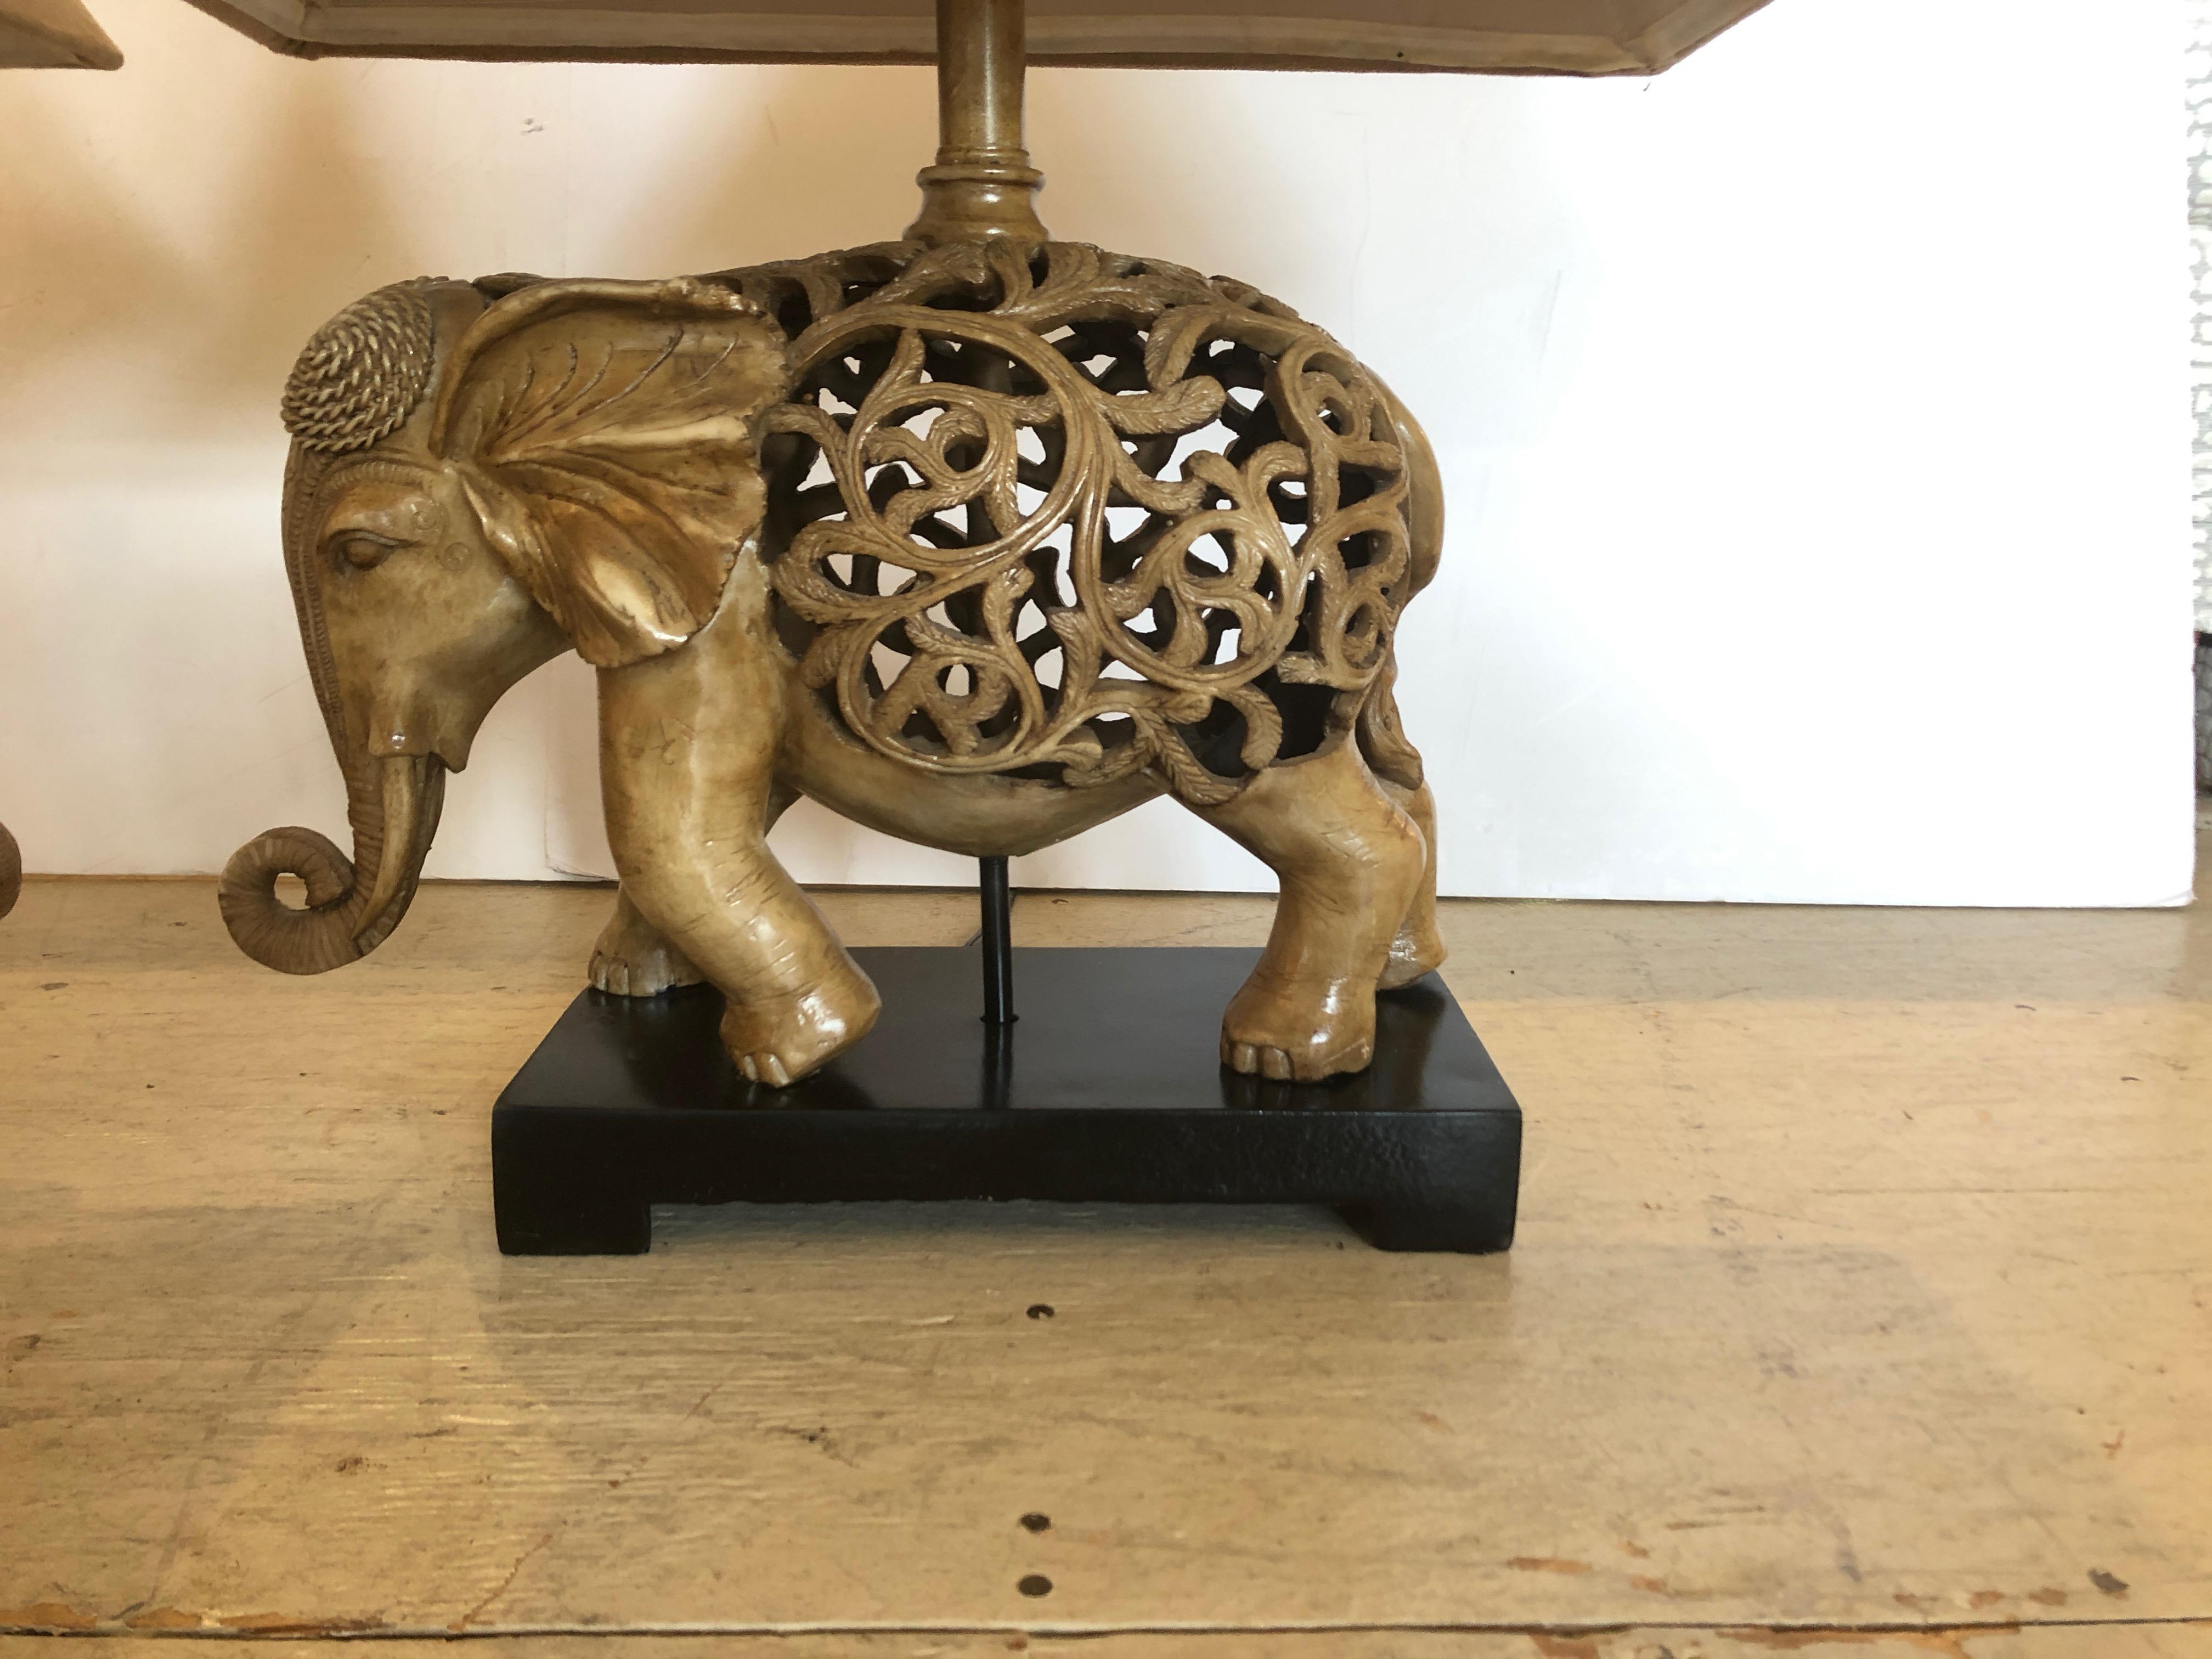 Unique pair of elephant lamps on ebonized wood bases. Lamps are a composite in a caramel color. The shades are handsome custom tan ultra suede.